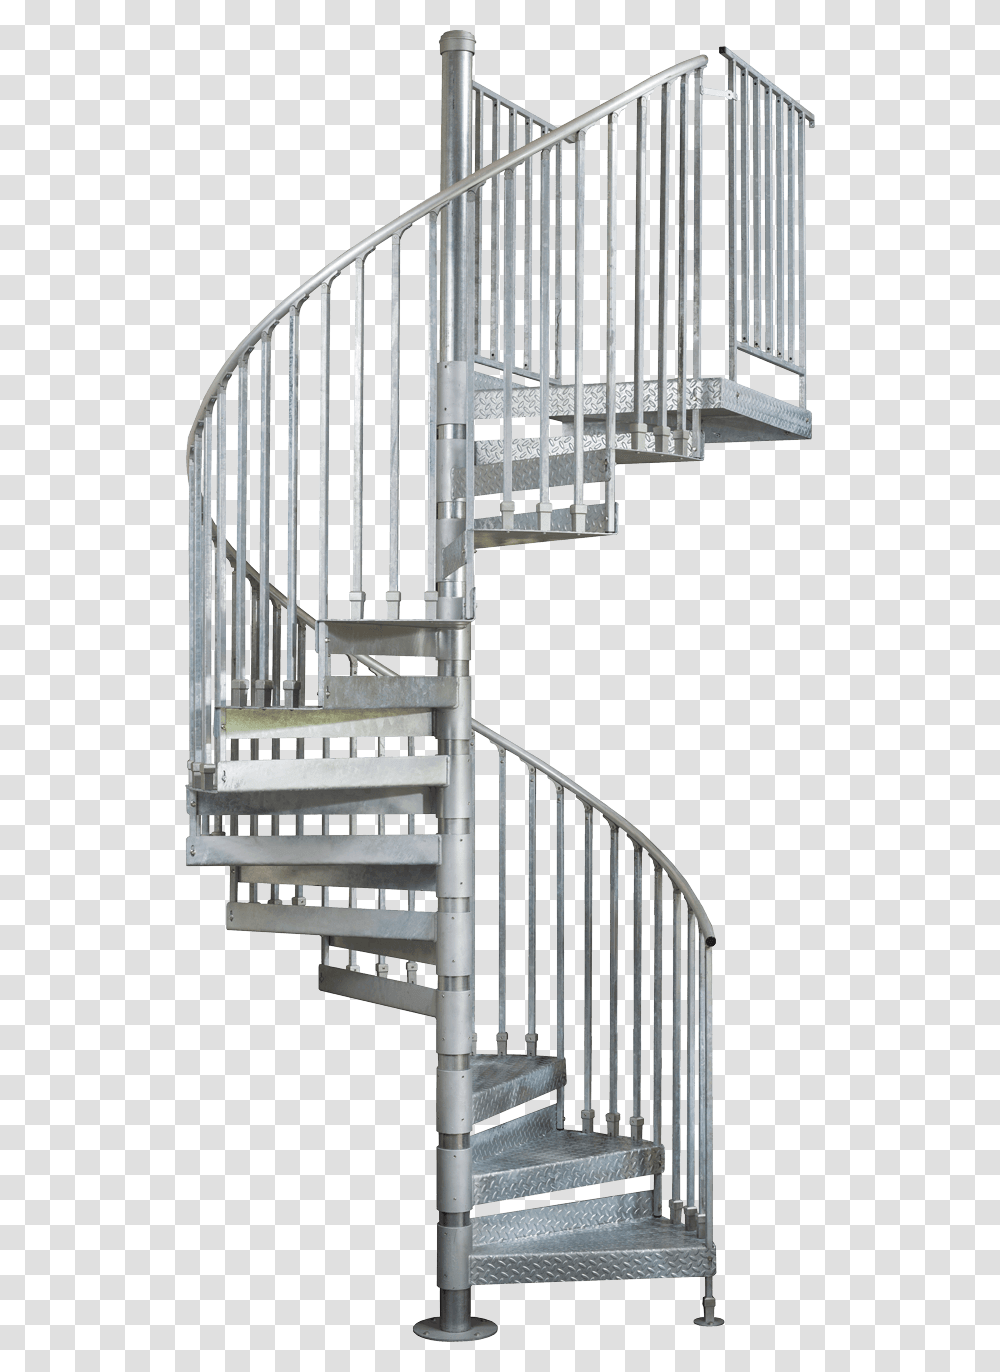 Spiral Stairs, Handrail, Banister, Staircase, Railing Transparent Png